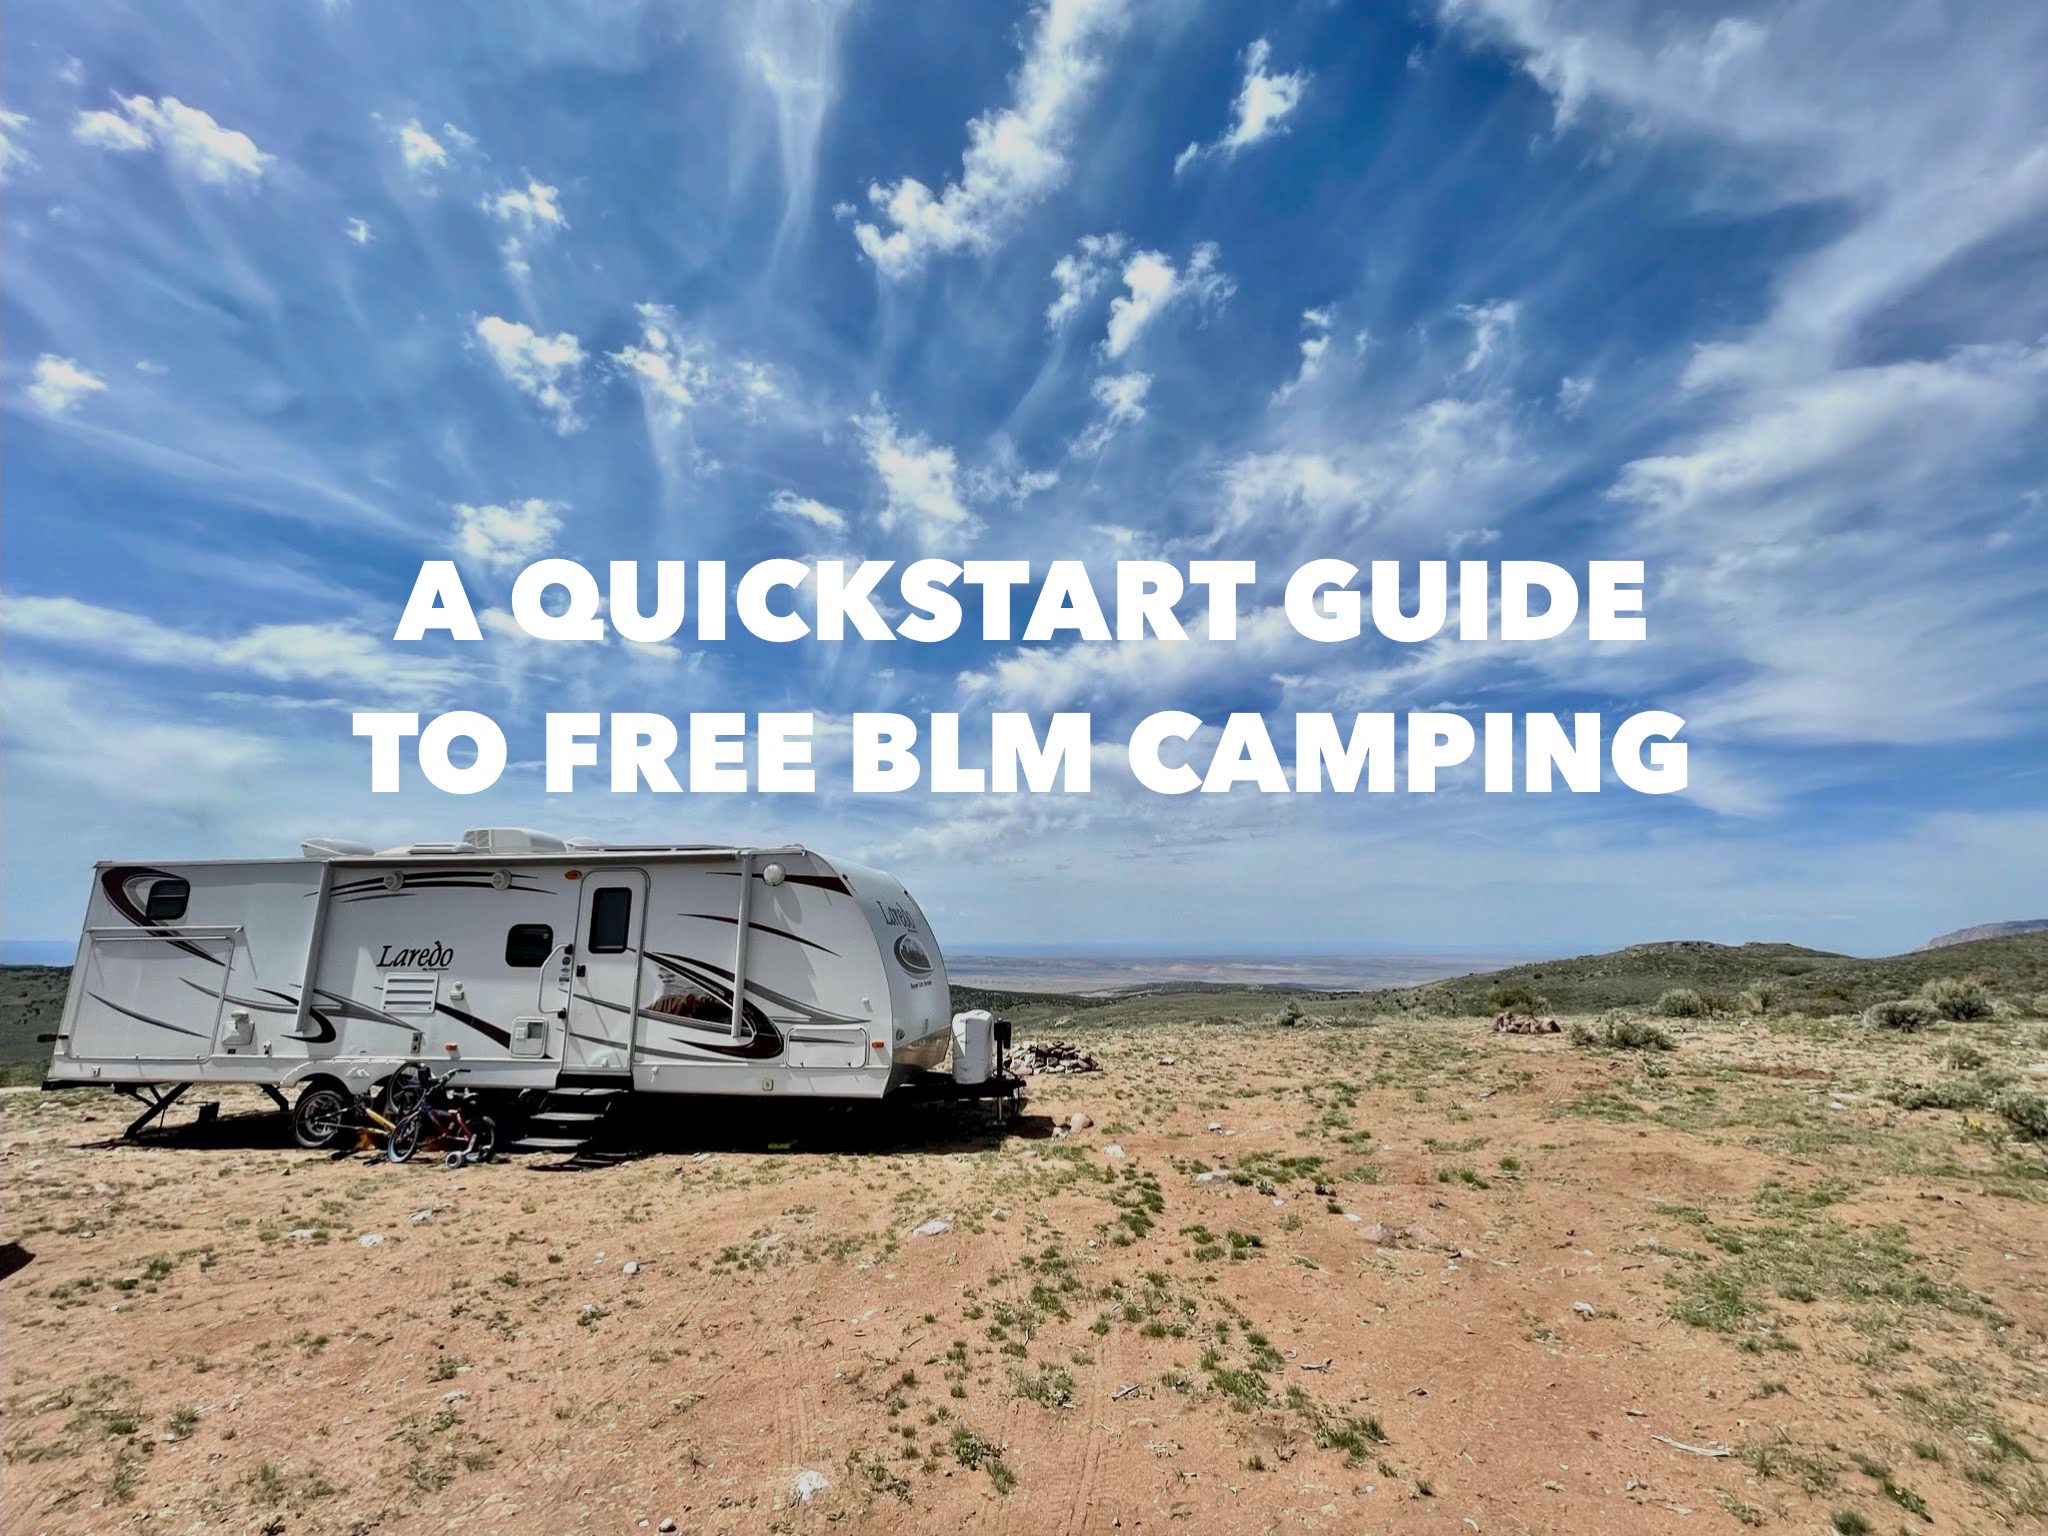 A Quickstart Guide to BLM Camping and RVing on Public Land